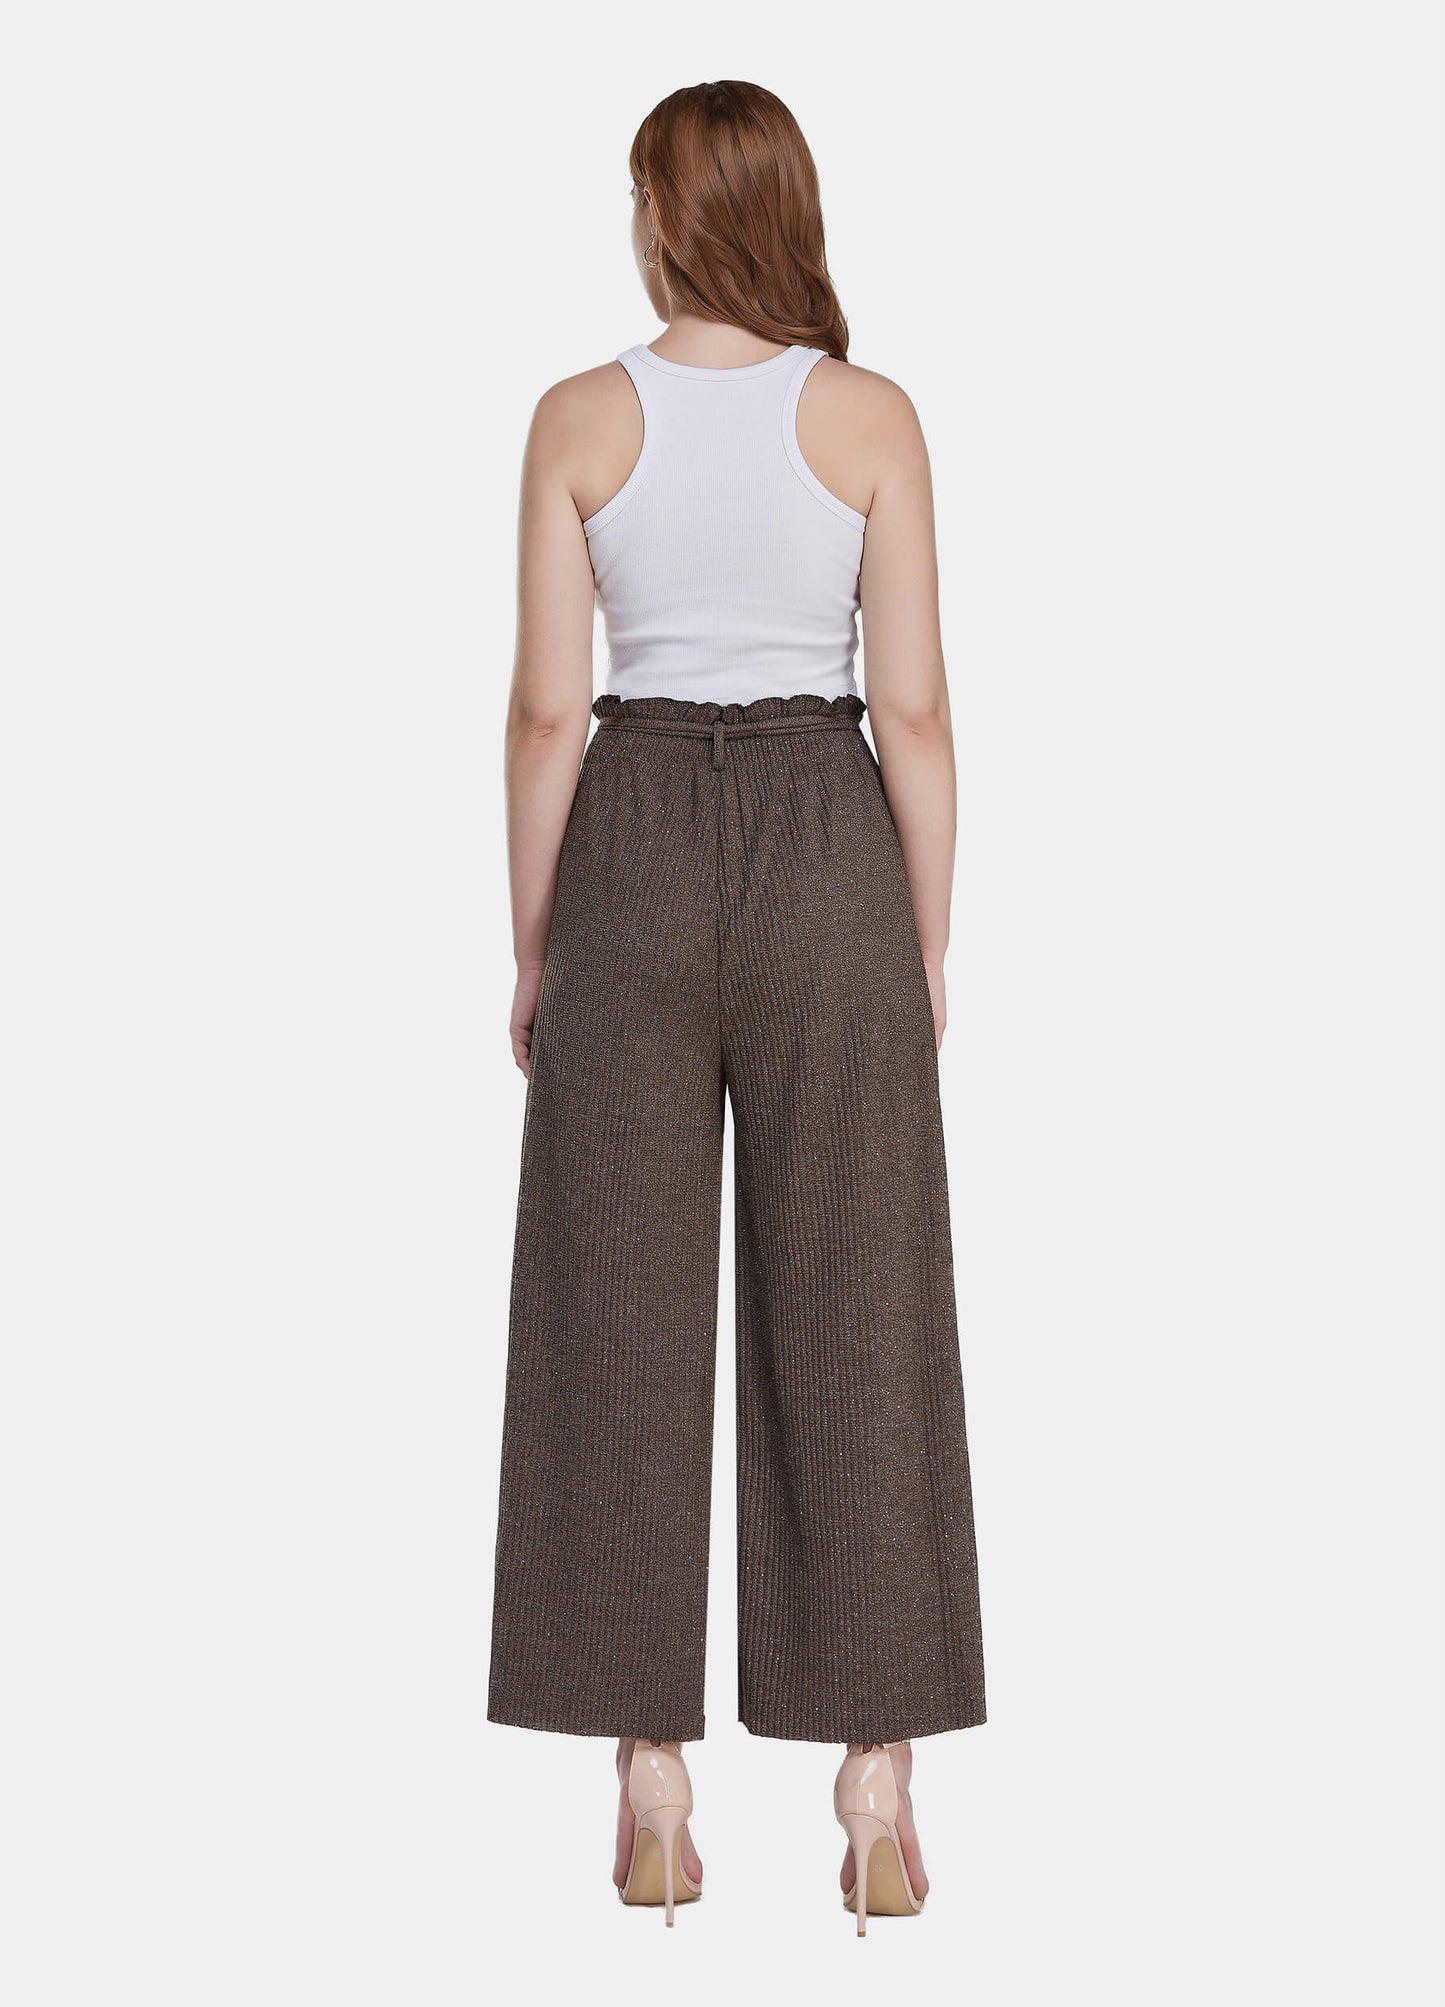 Women's Ruffle Trims Belted Comfort Wide Leg Trousers-Brown back view